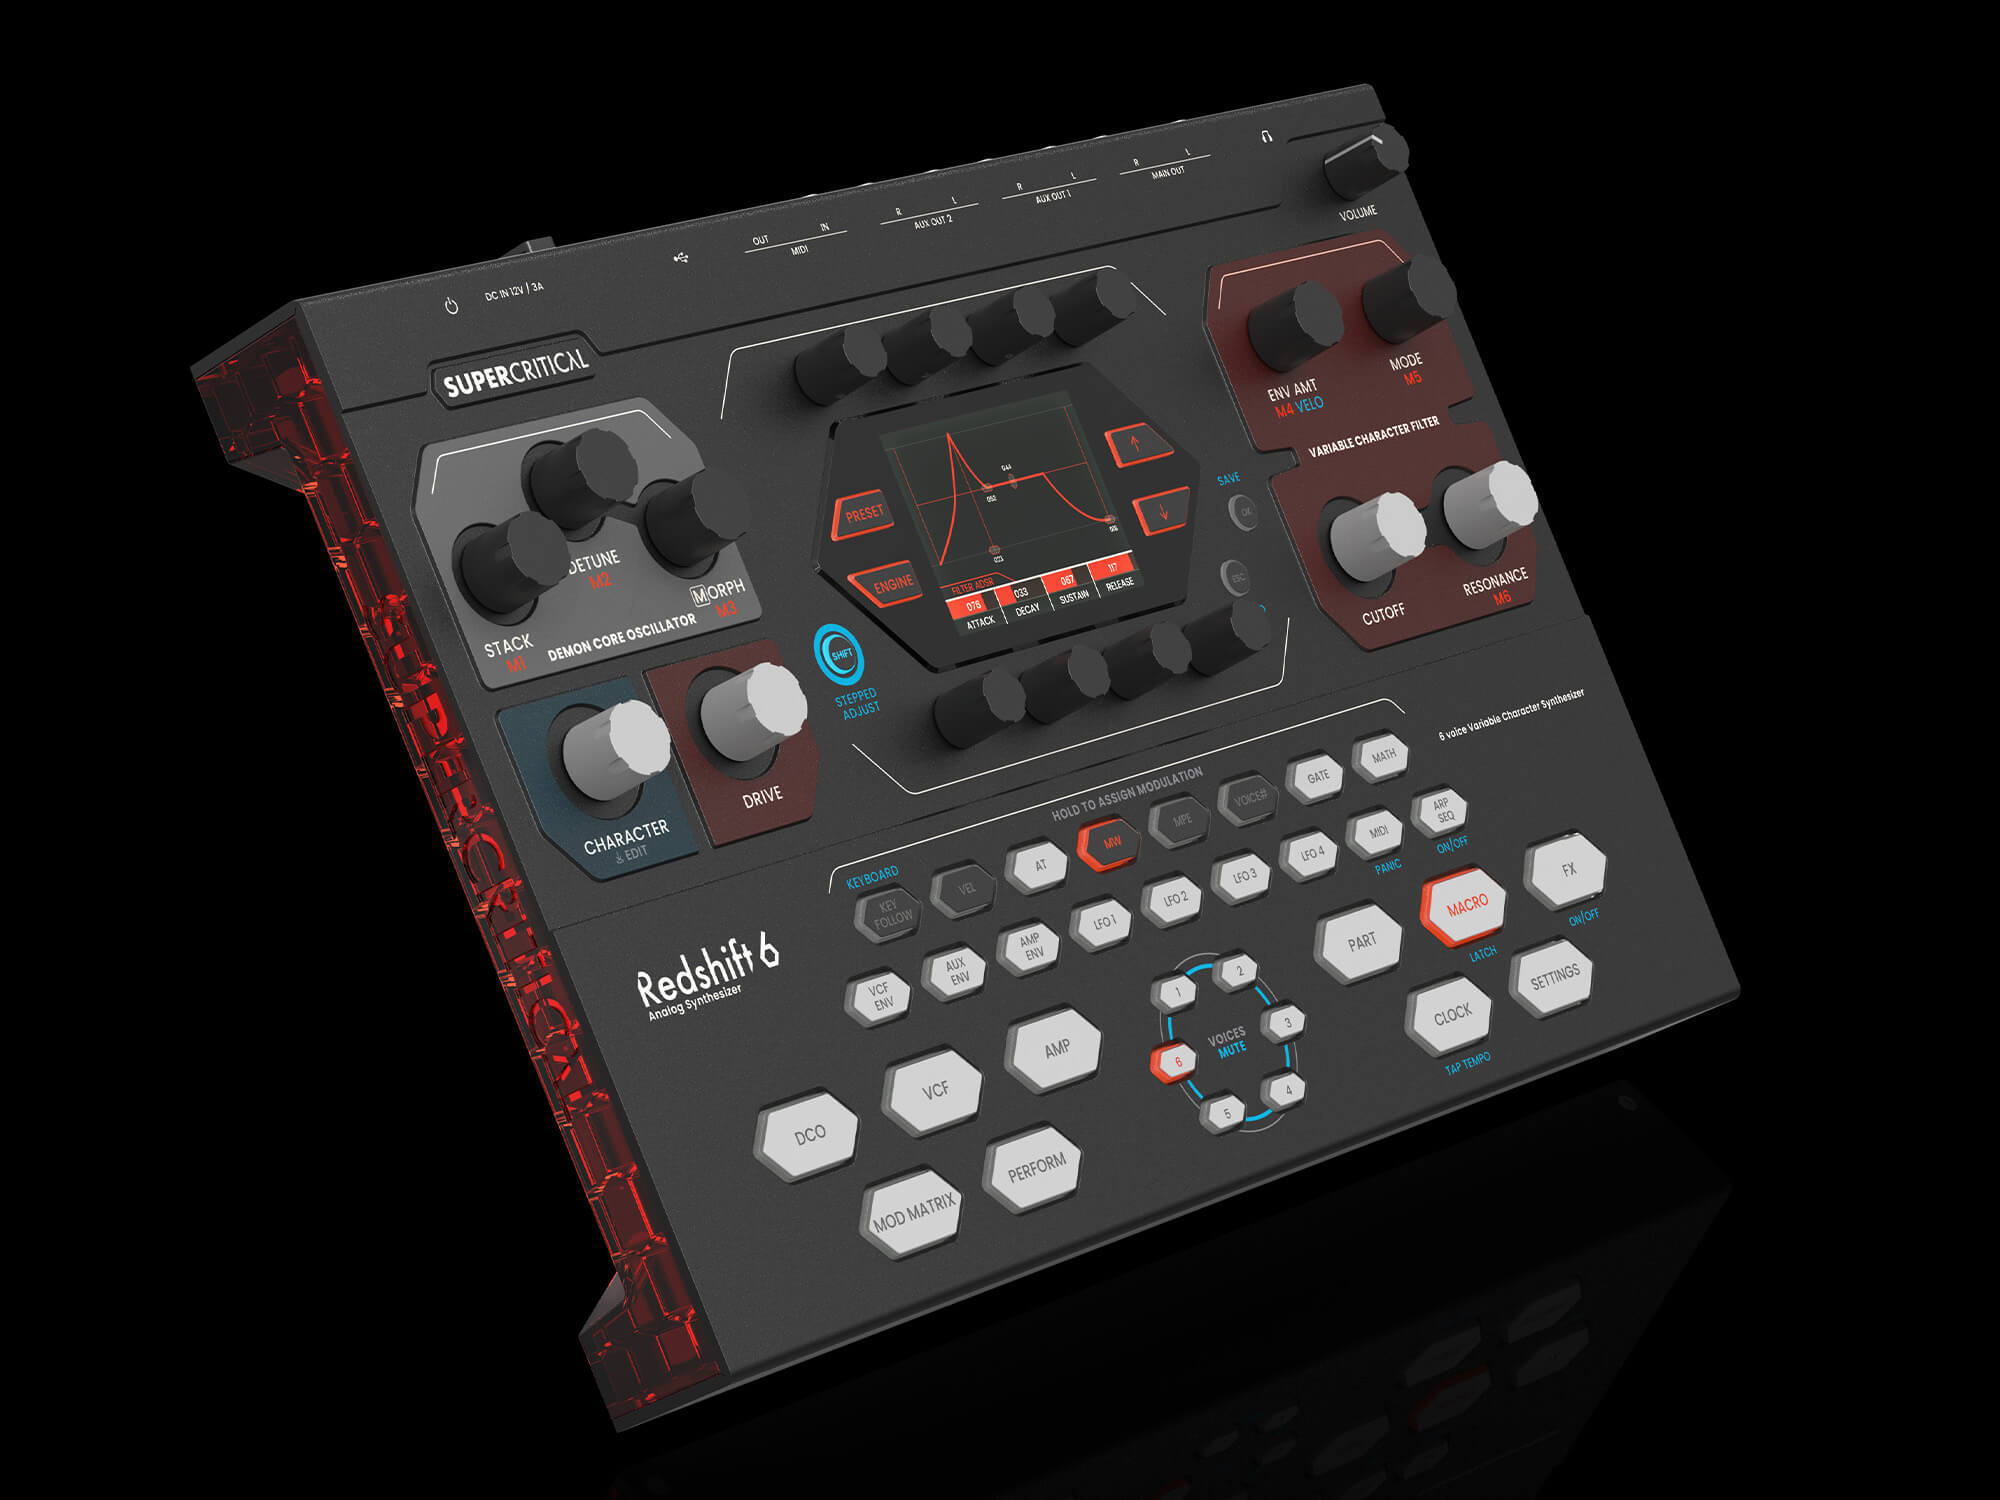 Supercritical Redshift 6. It is a black, square-shaped synth featuring a range of black and white buttons with red accents.